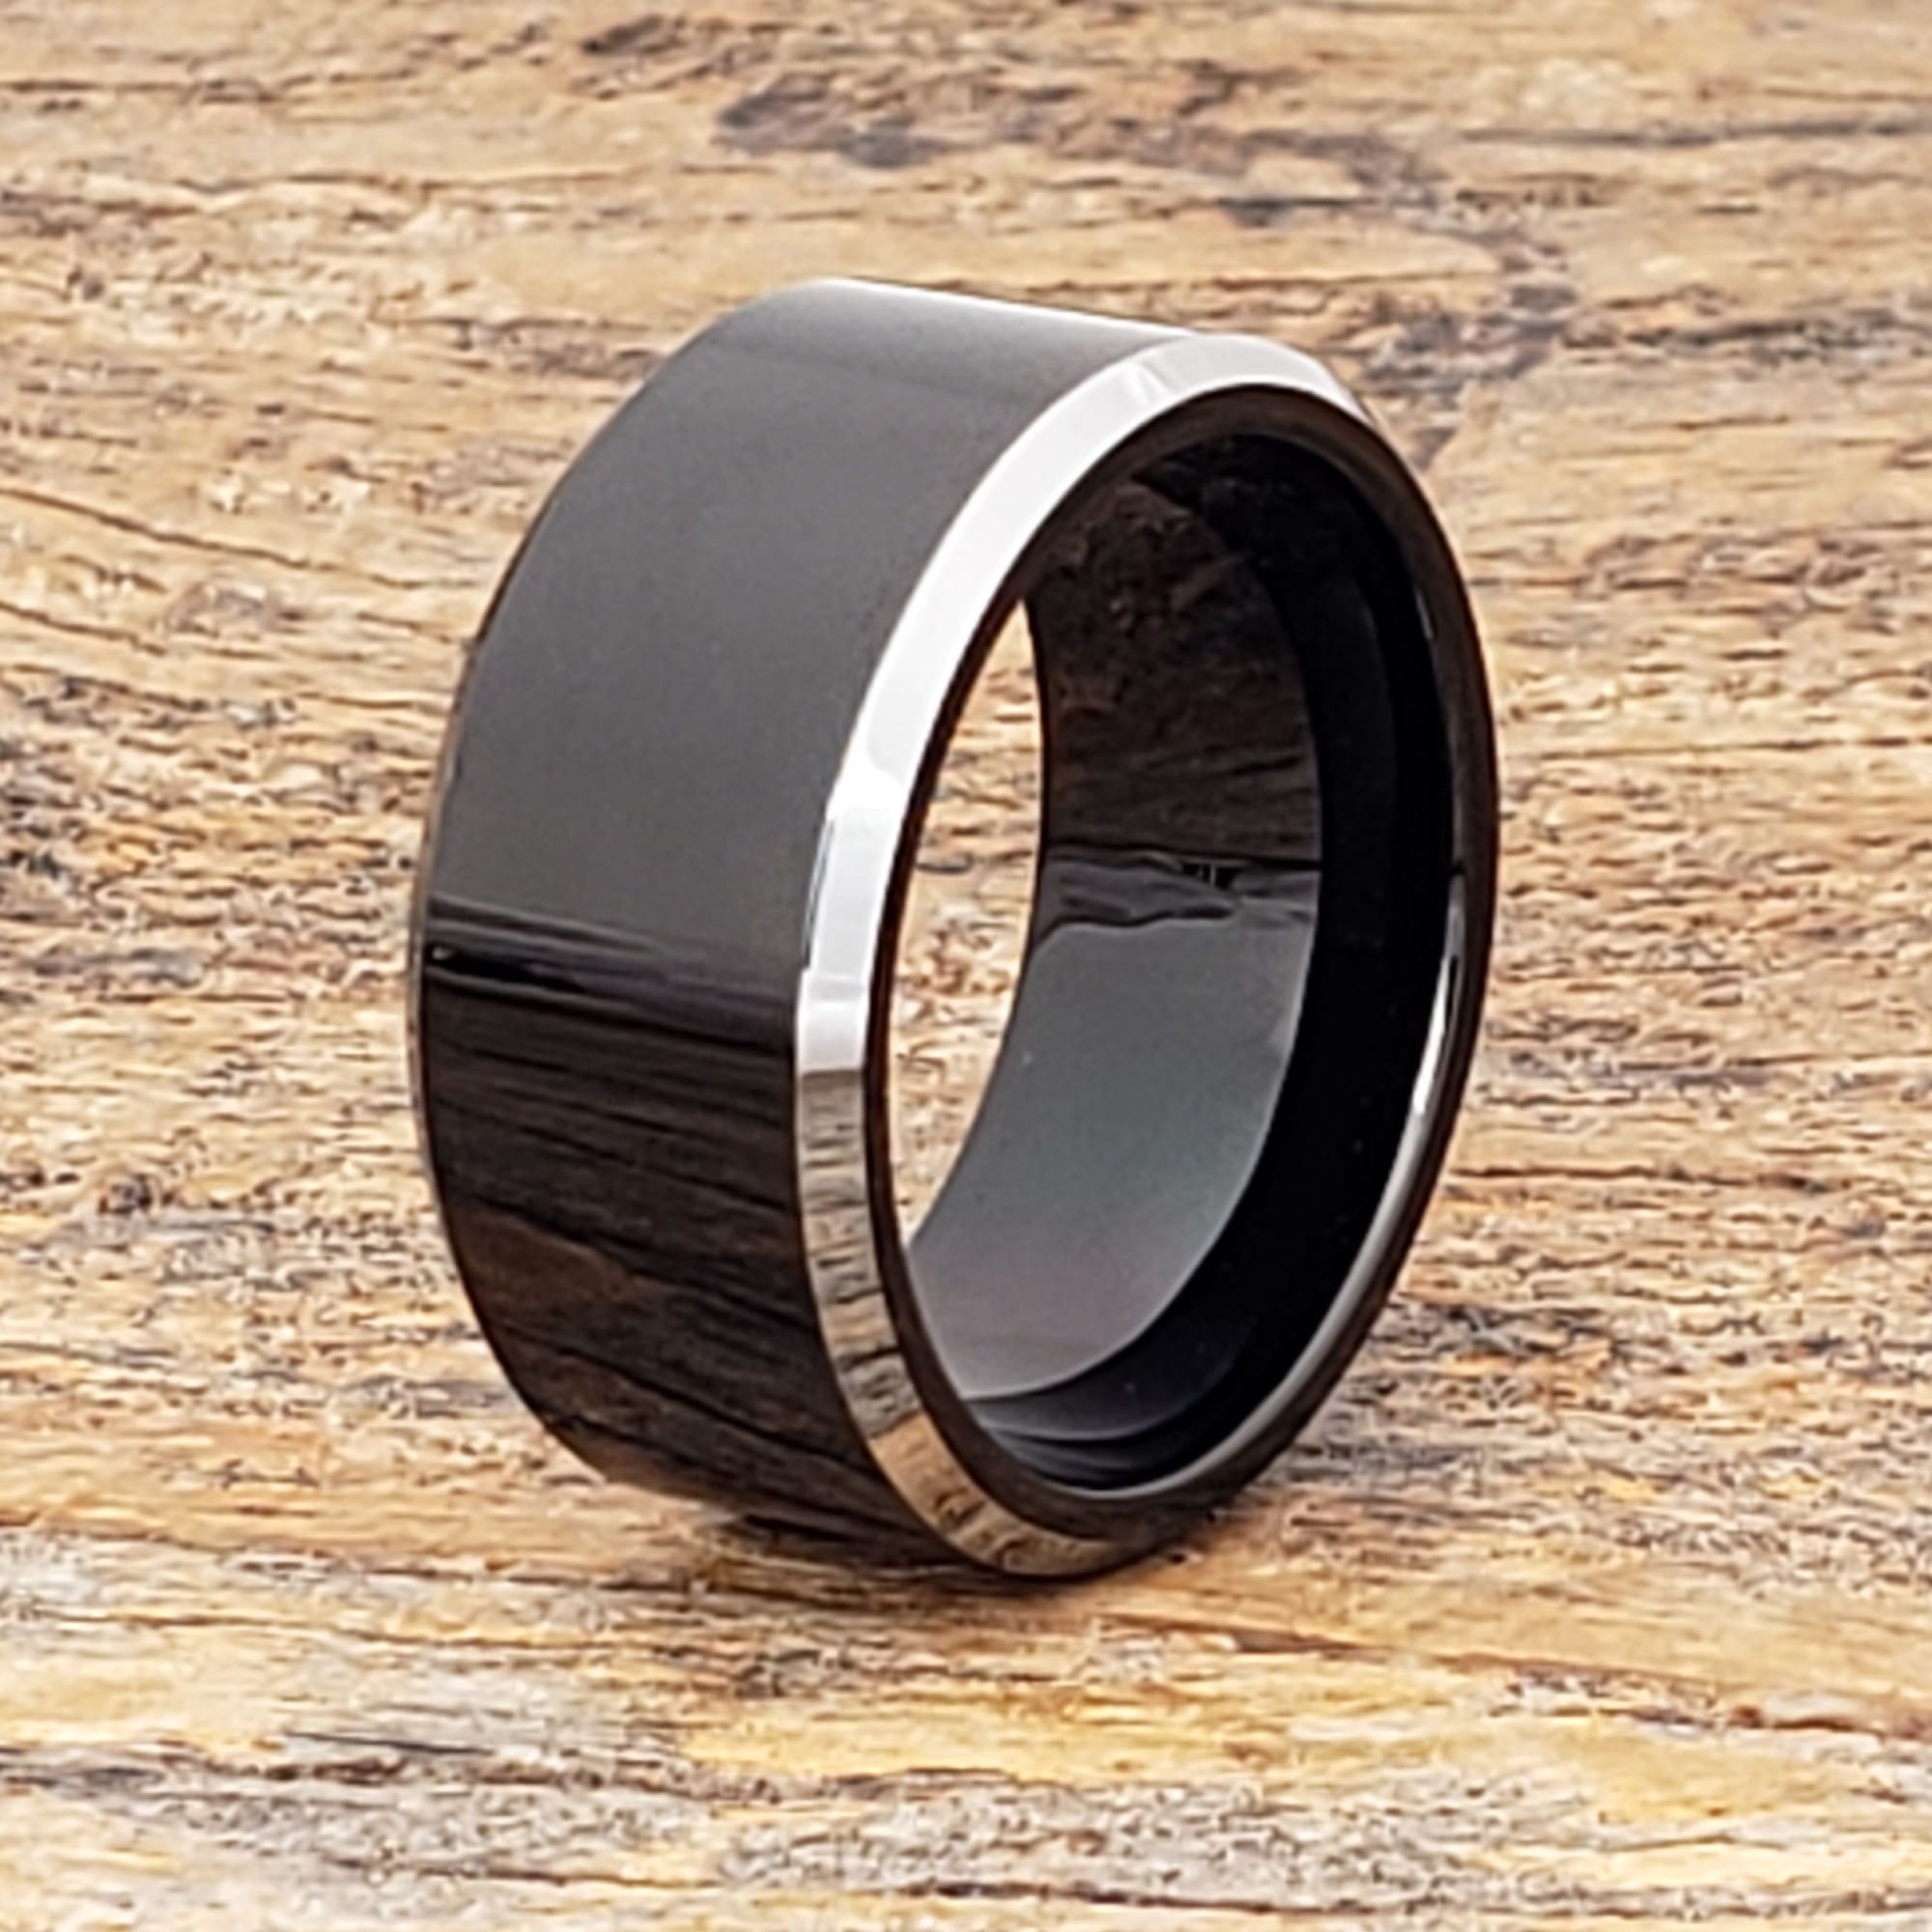 Kana Silver Edges Black Tungsten Rings - Forever Metals